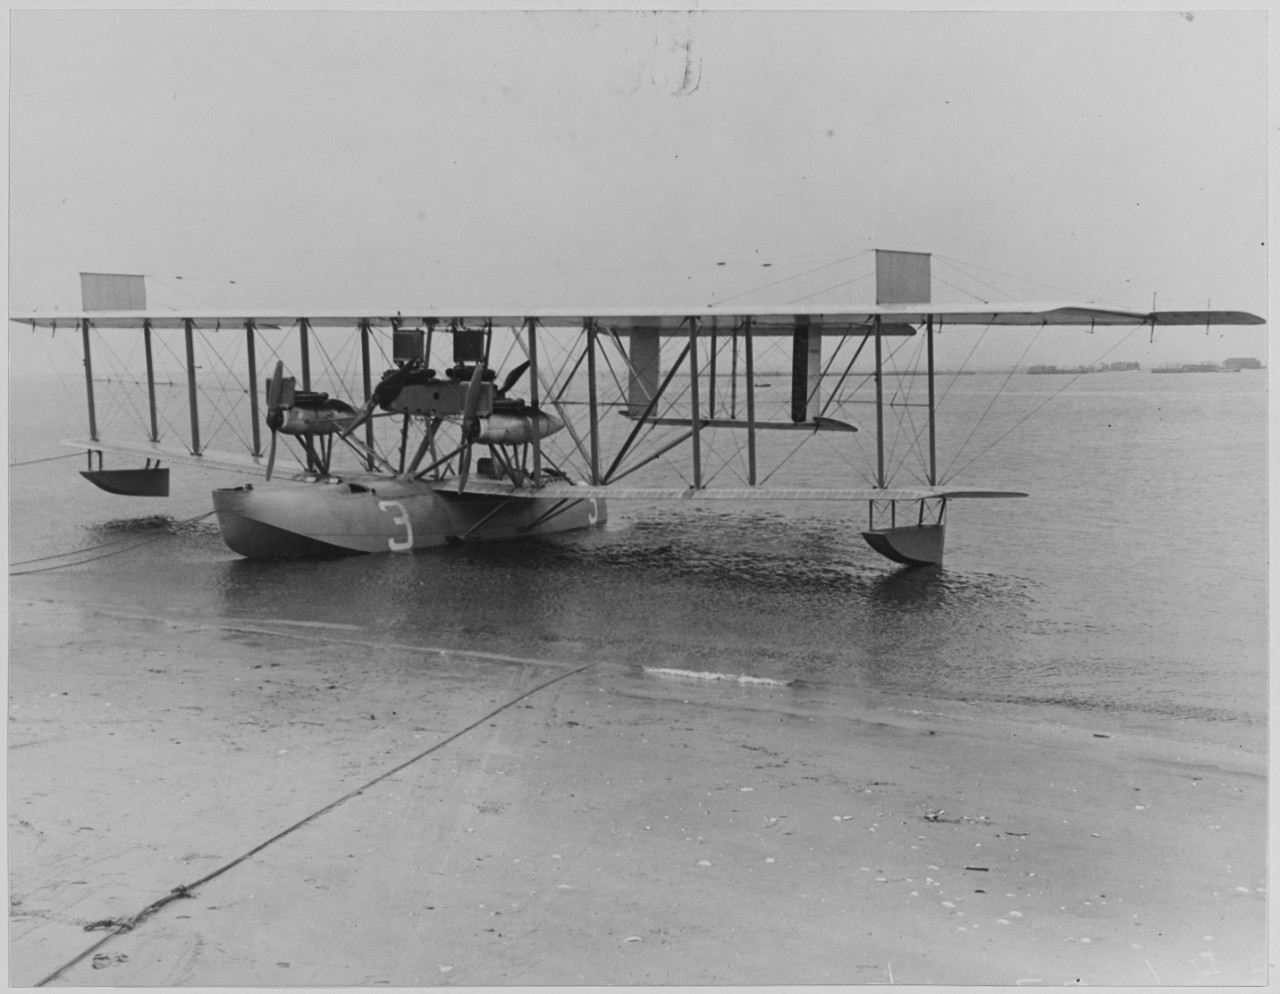 The Navy NC-3